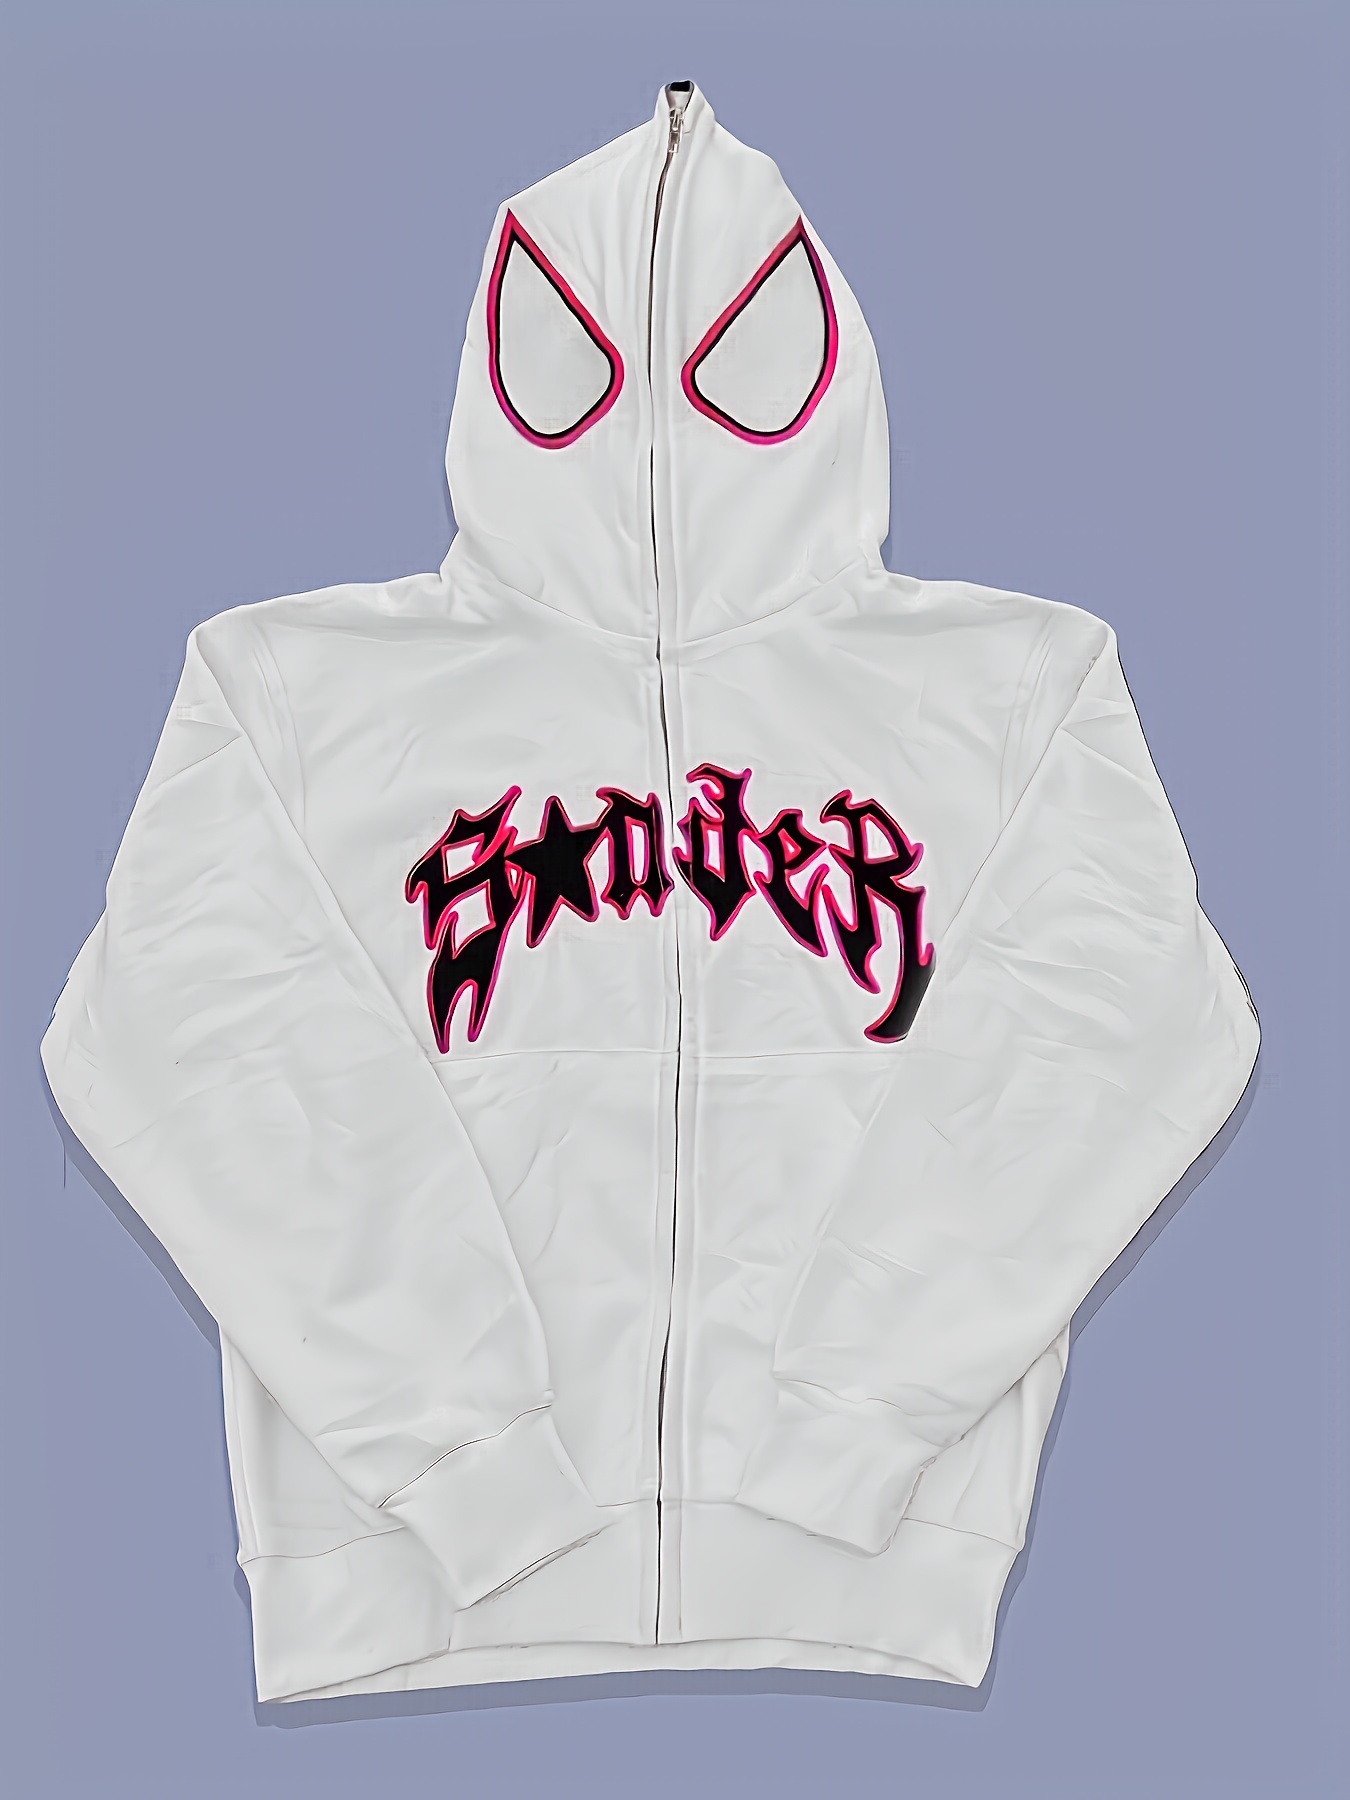 spider graphic print zip up hoodie casual long sleeve hoodie outerwear womens clothing